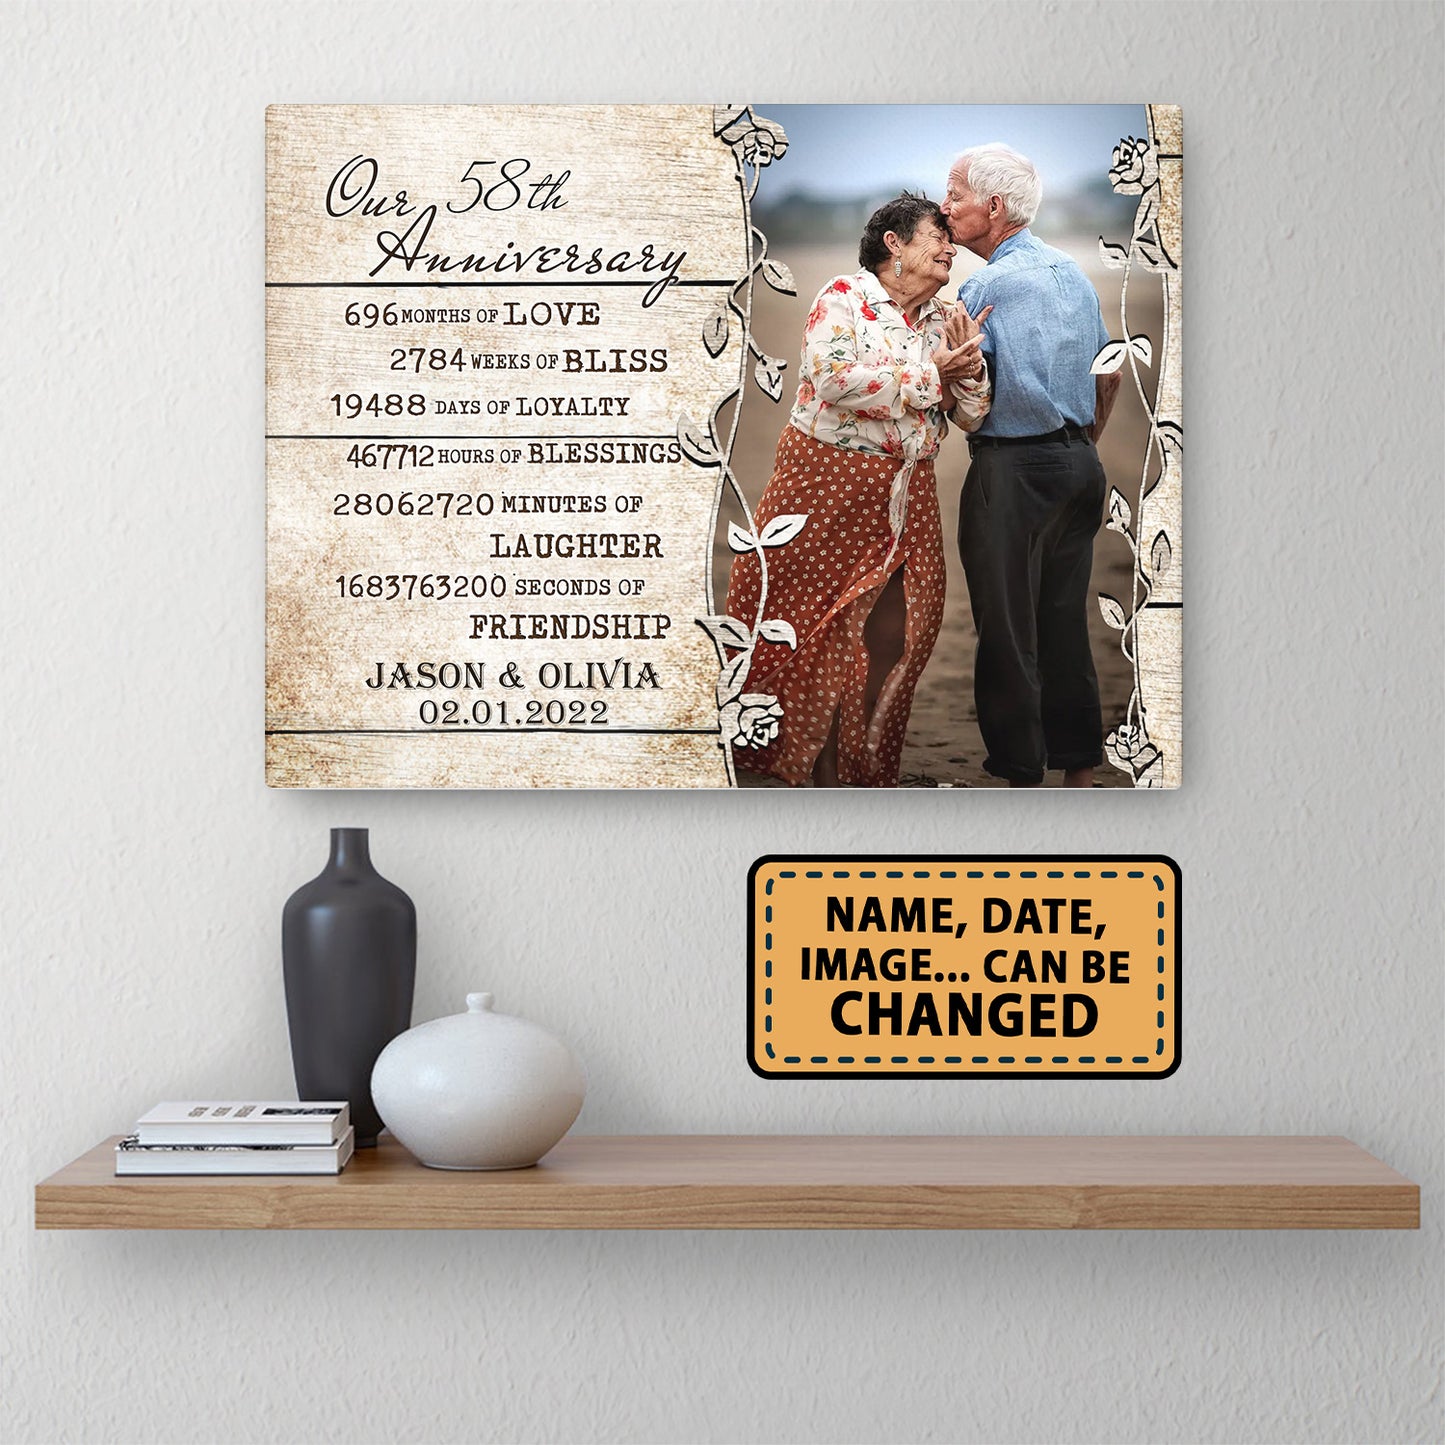 Our 58th Anniversary Timeless love Valentine Gift Personalized Canvas